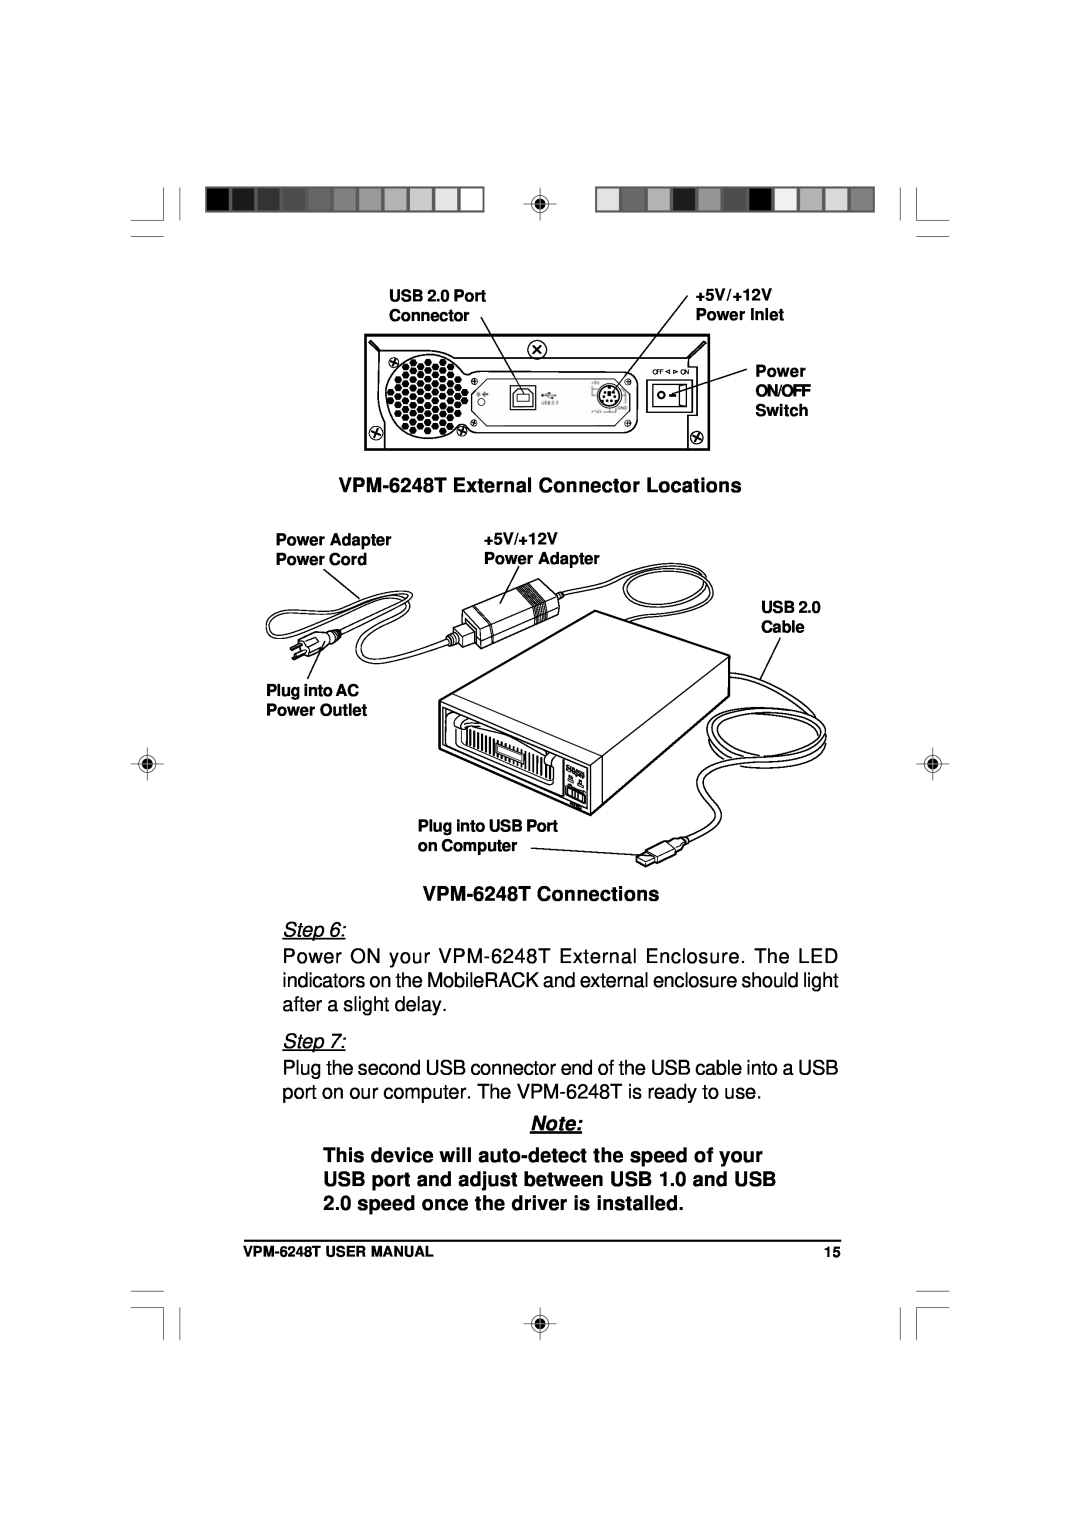 VIPowER user manual VPM-6248T External Connector Locations, VPM-6248T Connections, Step 